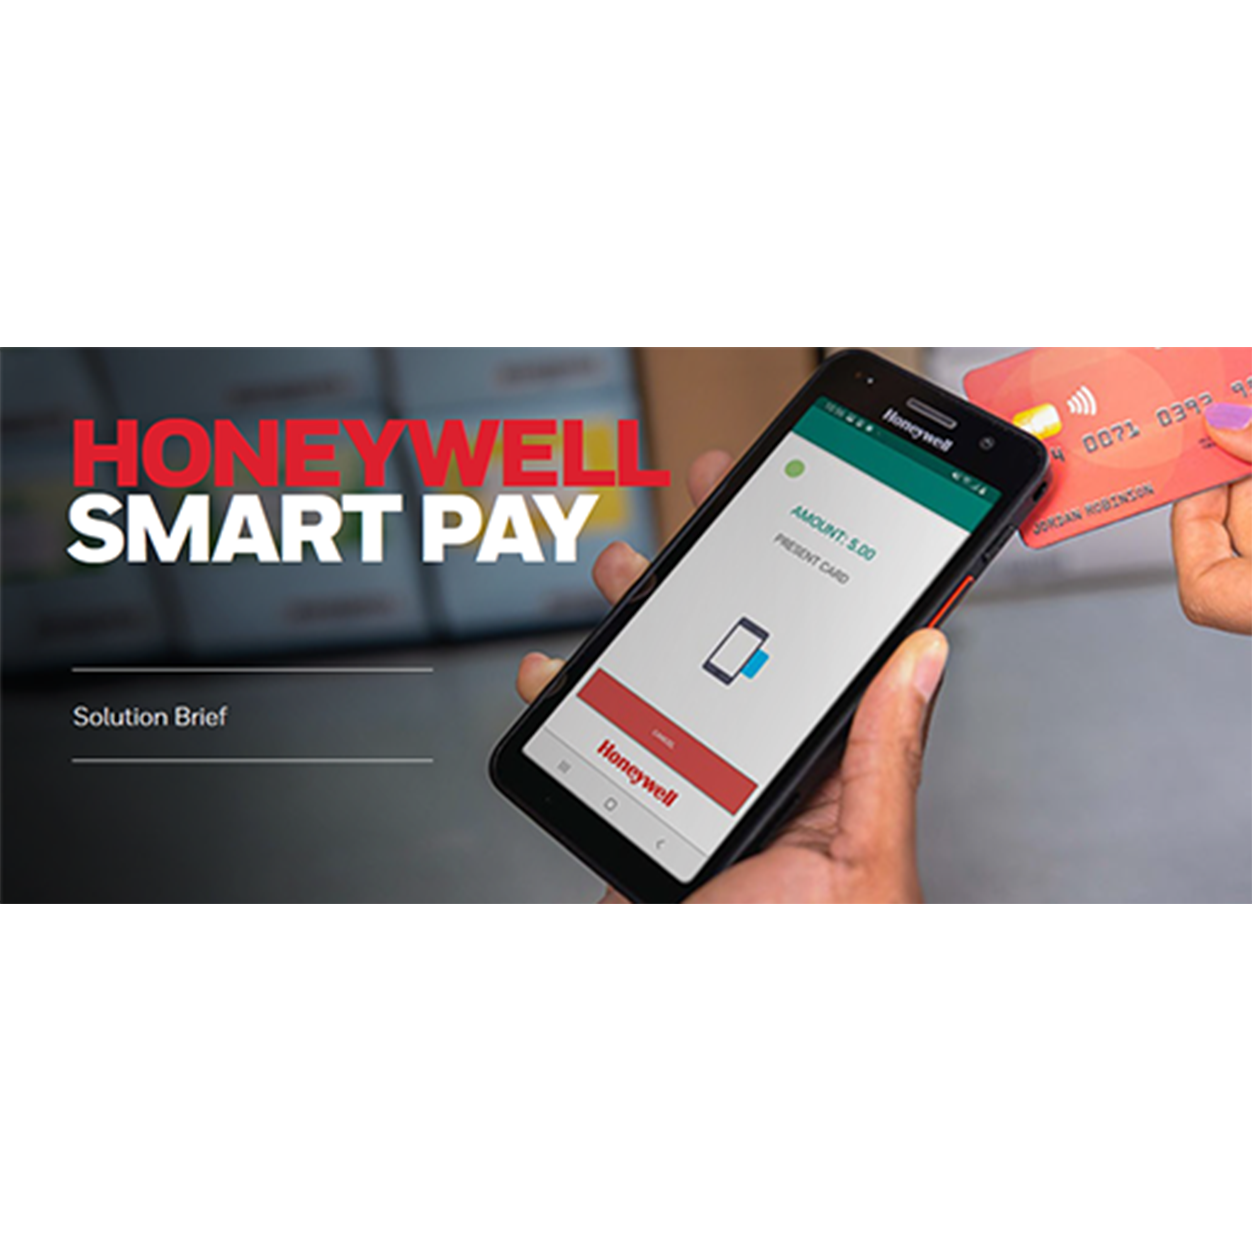 honeywell-smart-pay-featured-image